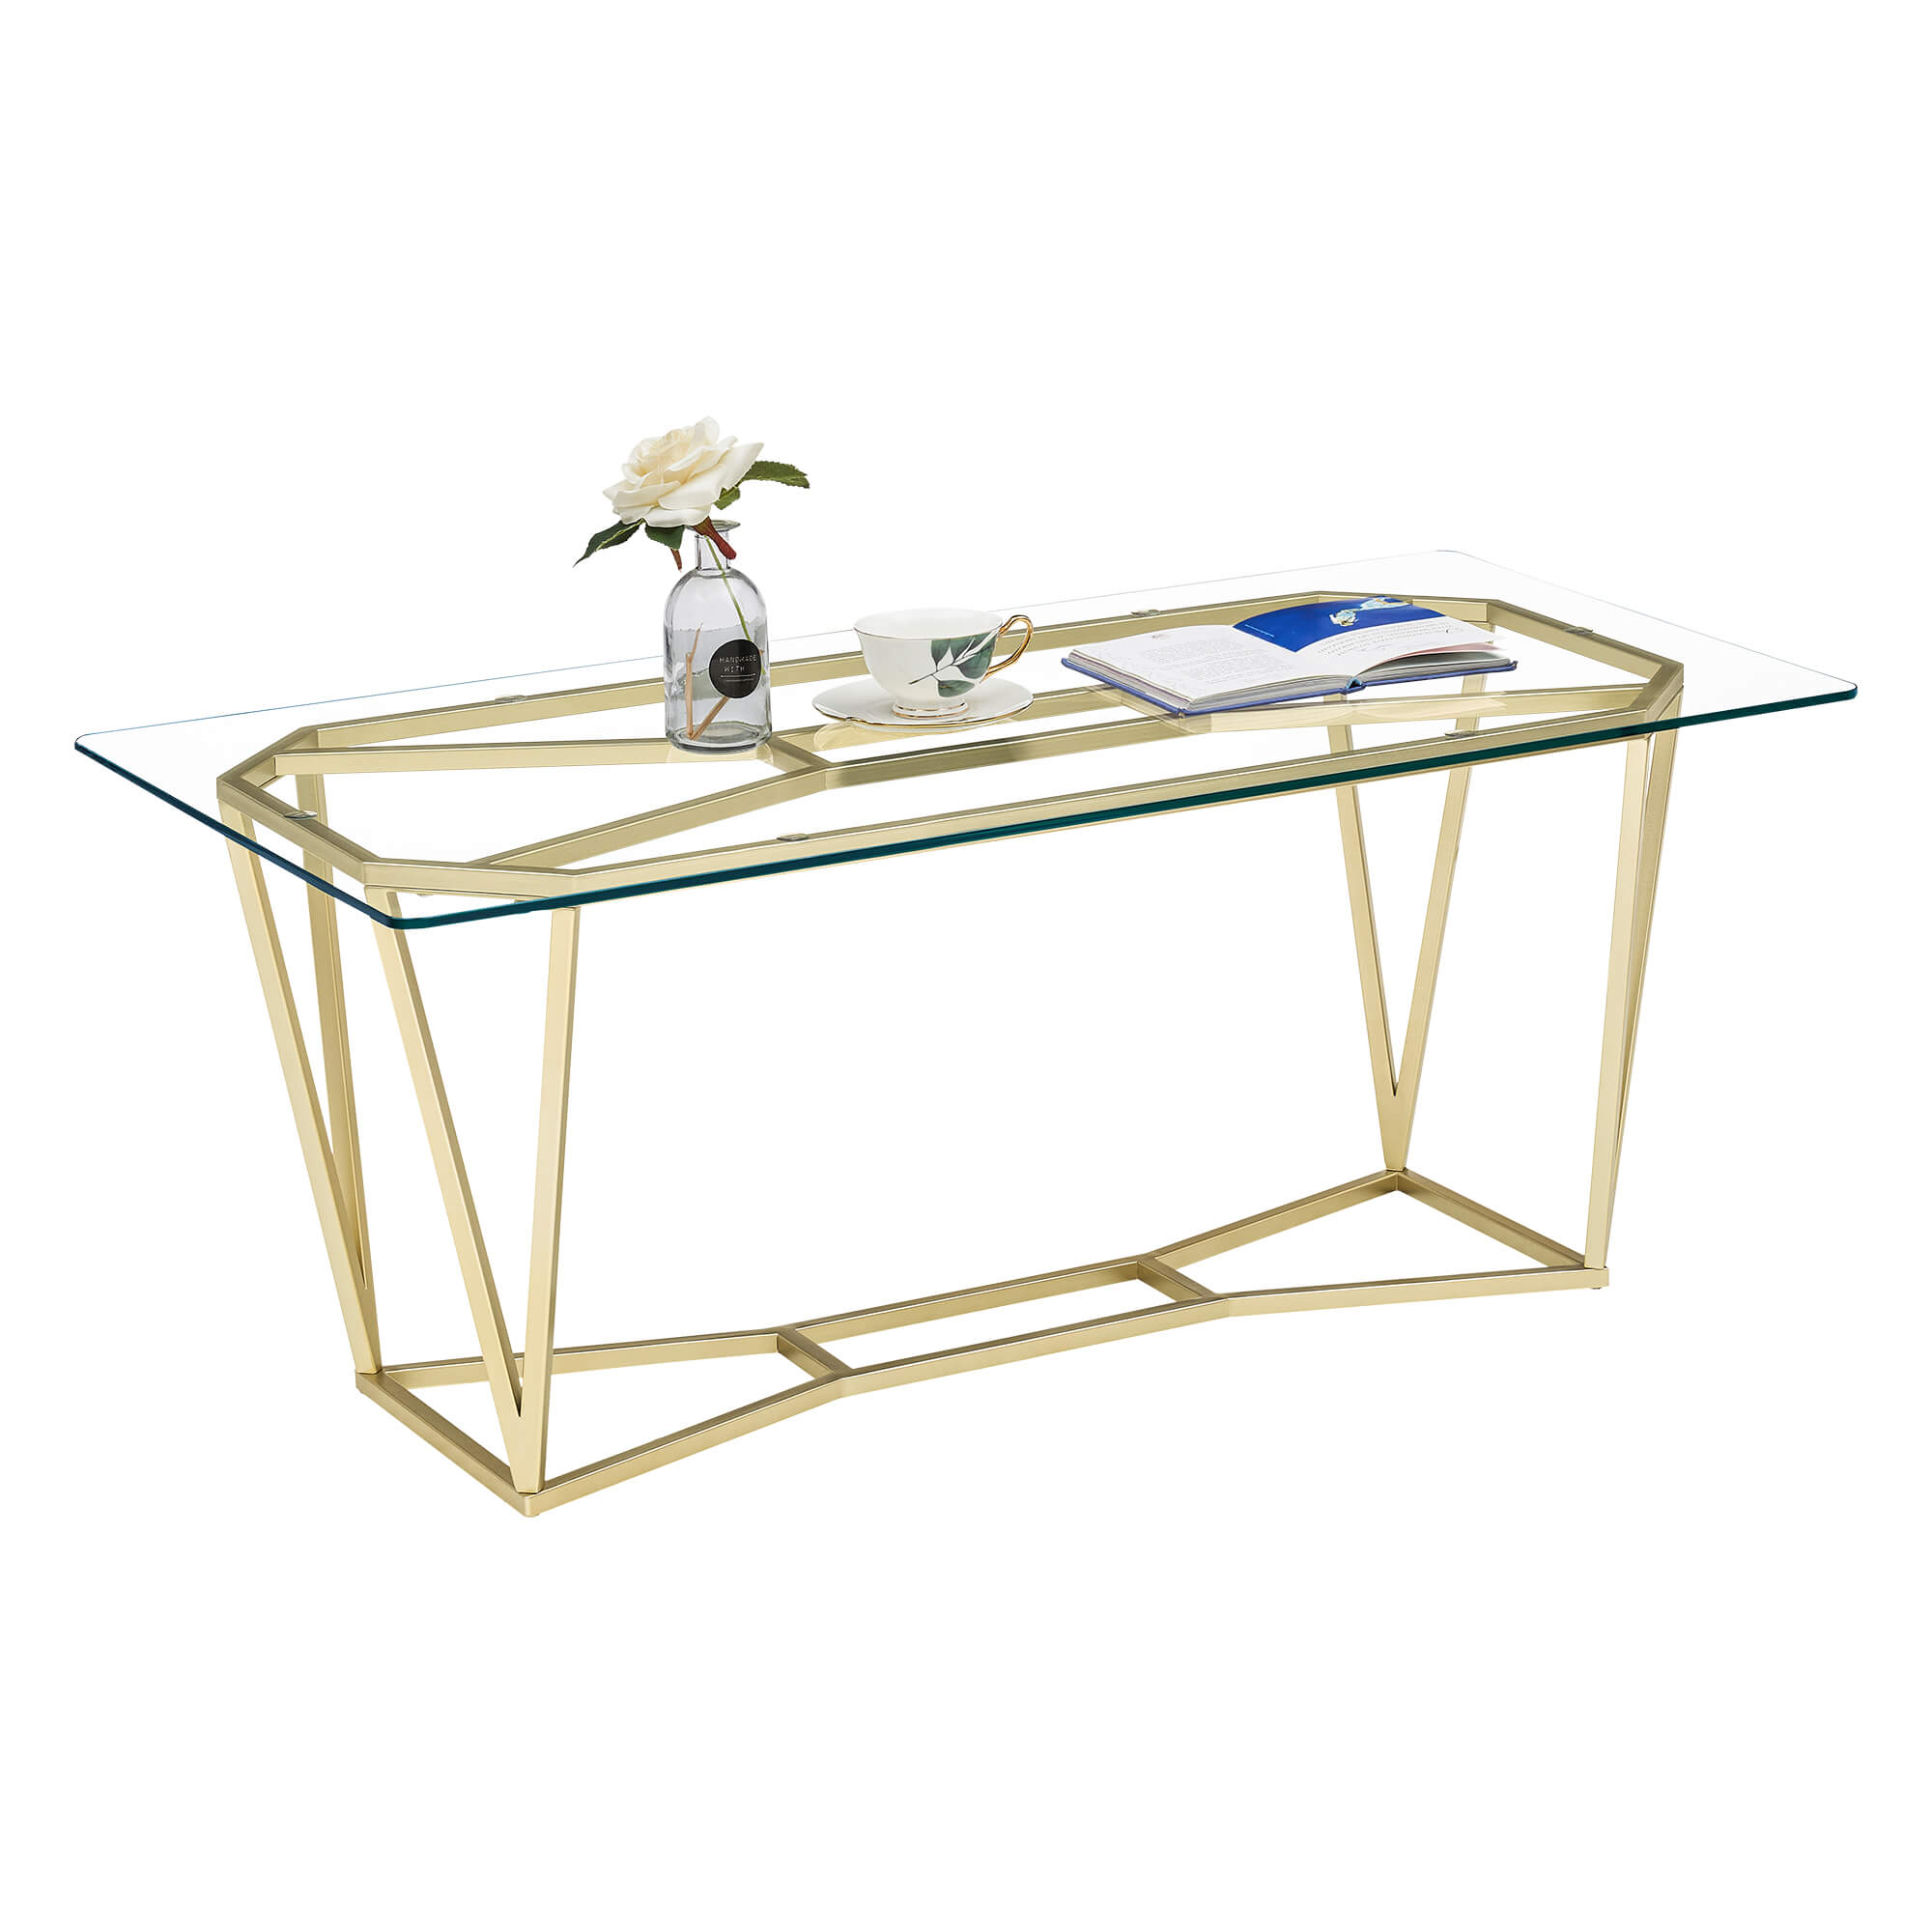 Ivinta Rectangle Glass Gold Coffee Table for Living Room,  Modern Cocktail Table